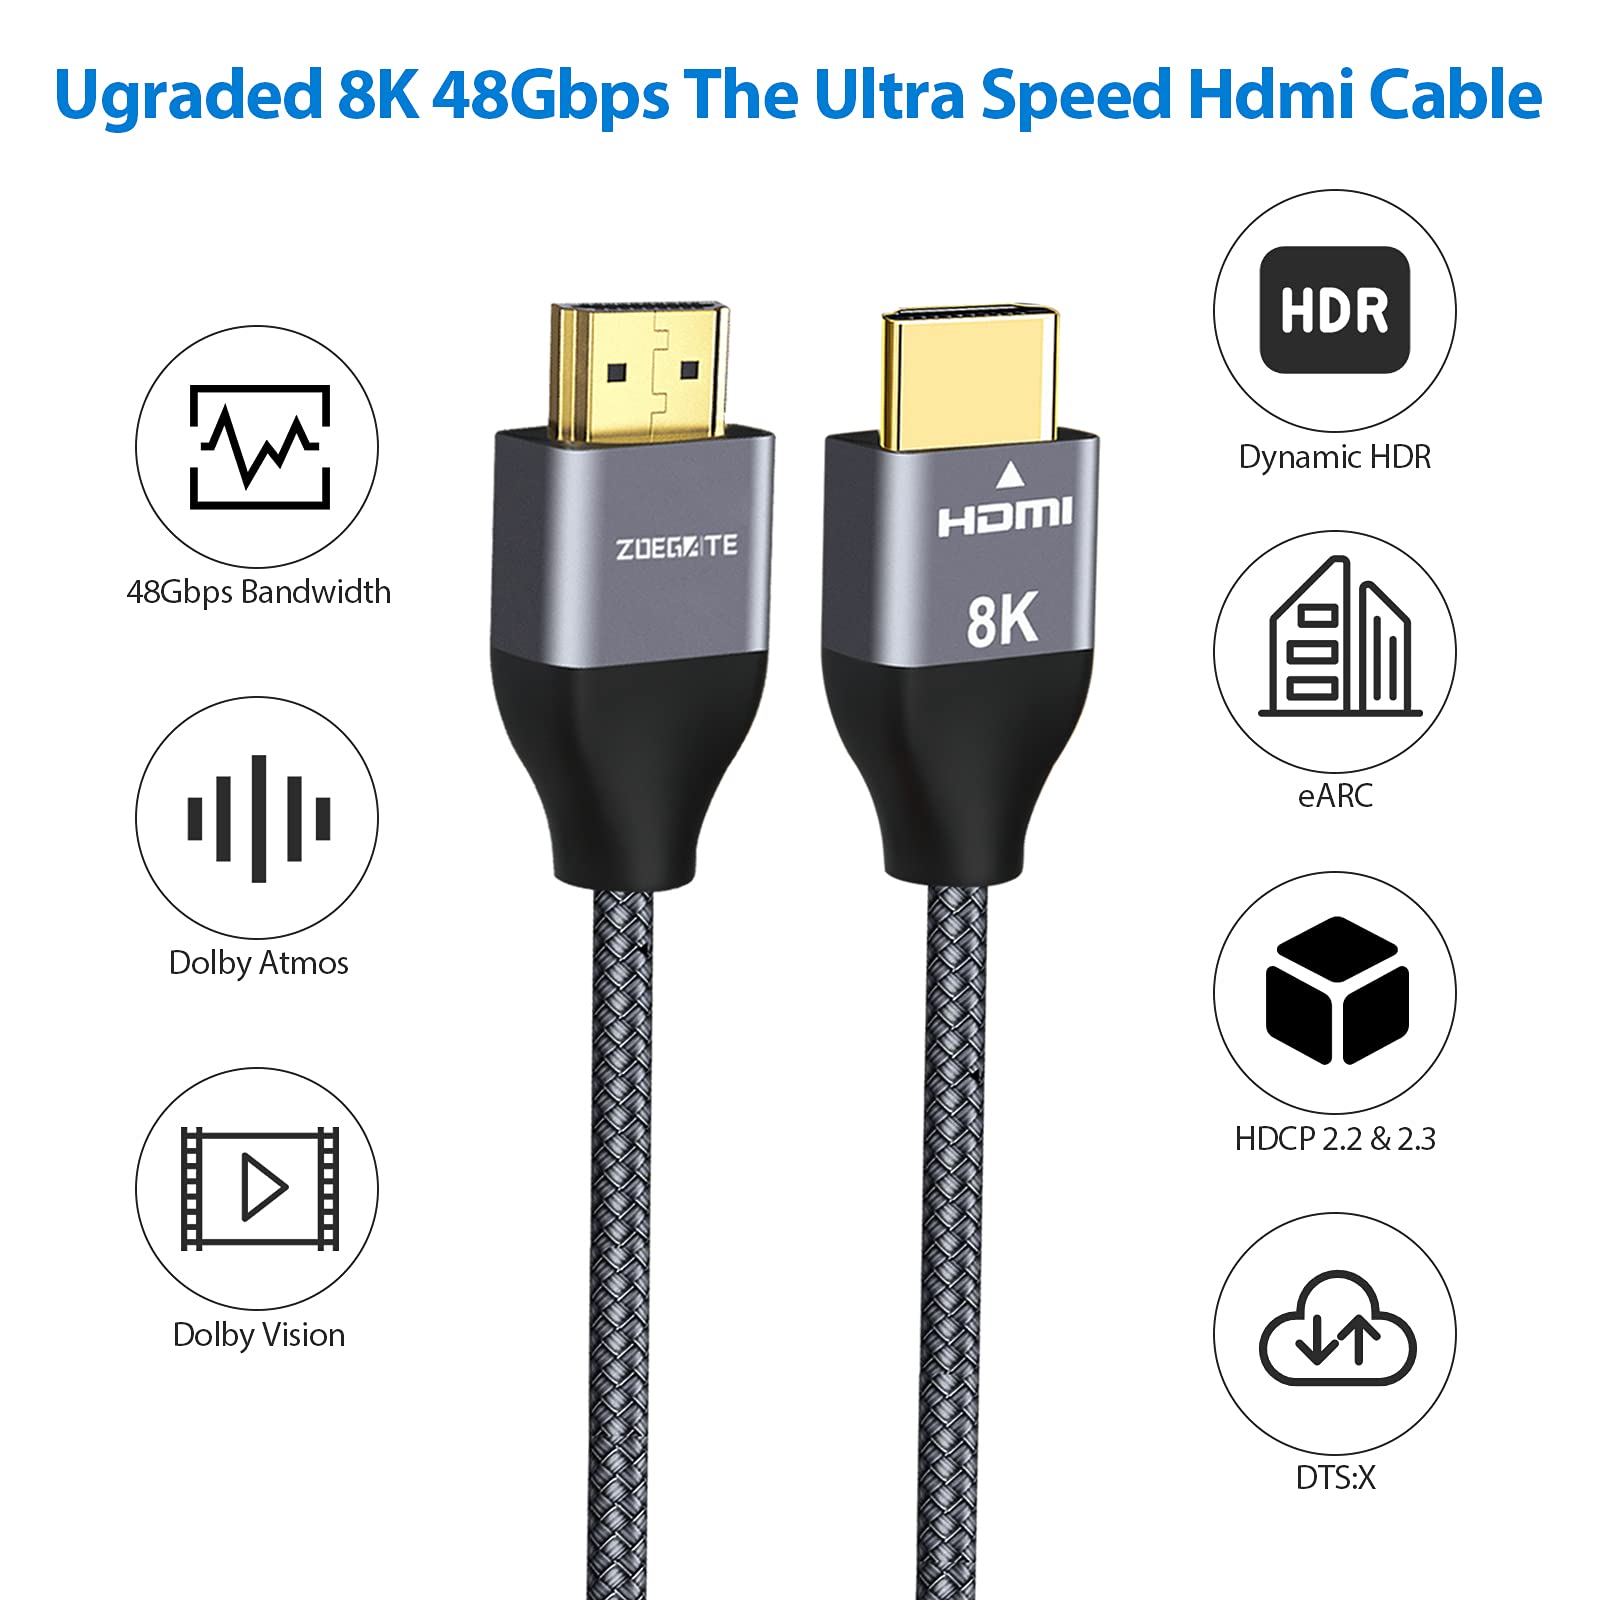 MINJANDLEE 2Pack 8K HDMI 2.1 Cable 48Gbps Certified Ultra High Speed HDMI Braided Cord 6.6ft, 4K120 8K60 144Hz eARC HDR HDCP 2.2 2.3 3D, Compatible with Ethernet PS5, PS4, X-Box Series X, LG QLED TV